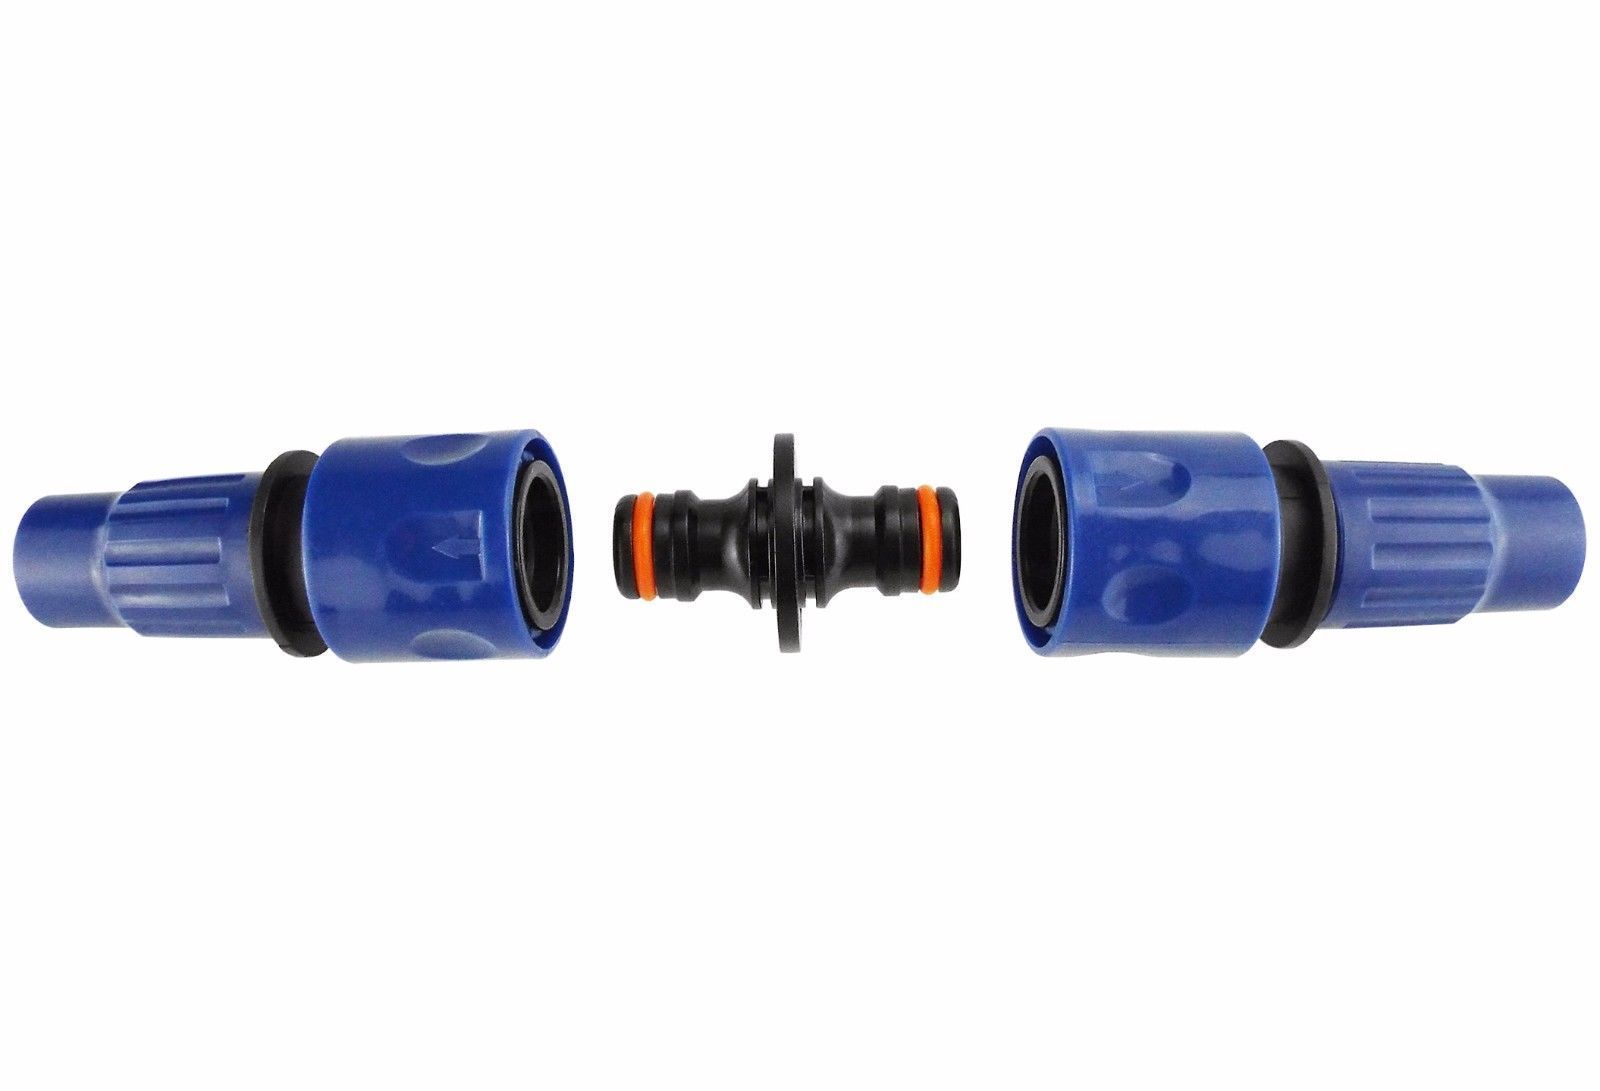 Blue Female Repair Connectors/ Joiner Parts for XHose, Expanding Hose – The  Lazee Camper